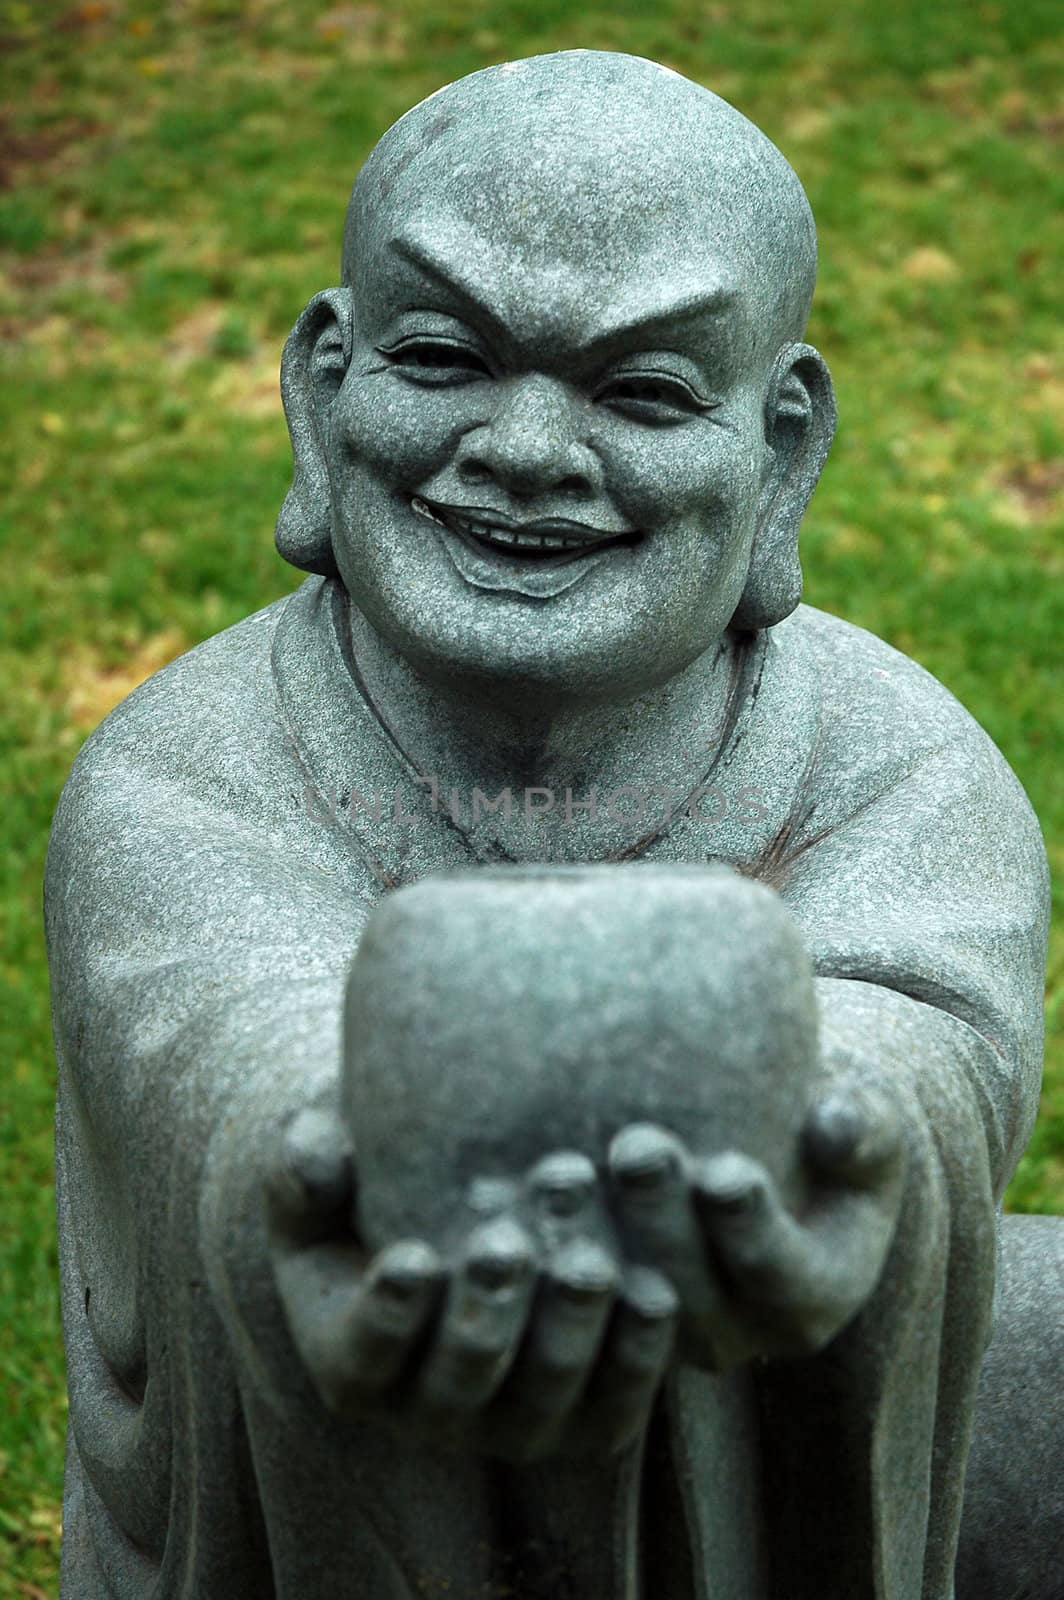 stone buddha sculpture offering a cup and smiling, grass in background